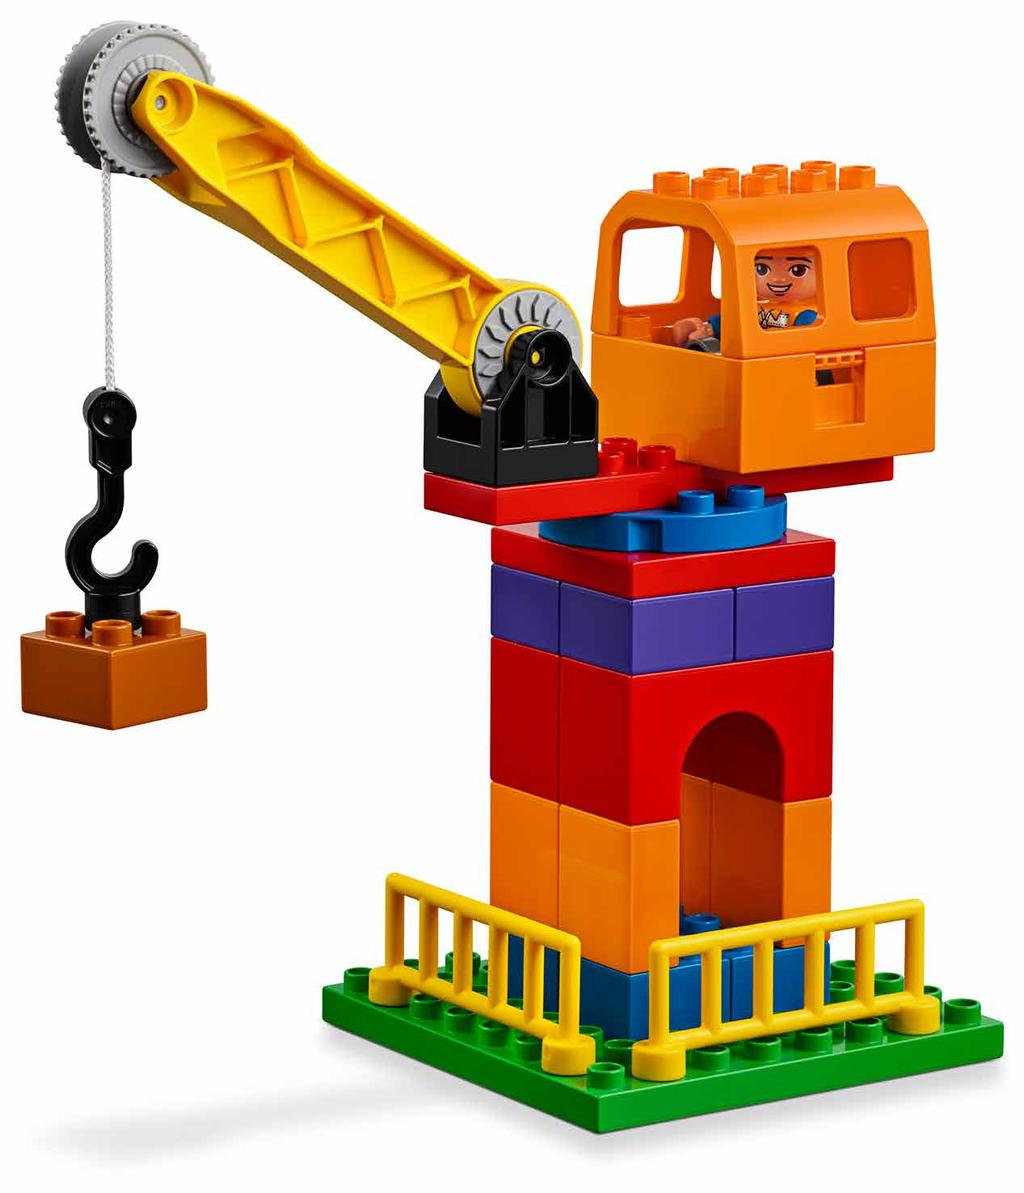 LEGO, the LEGO logo and DUPLO are trademarks of the/sont des marques de commerce du/son